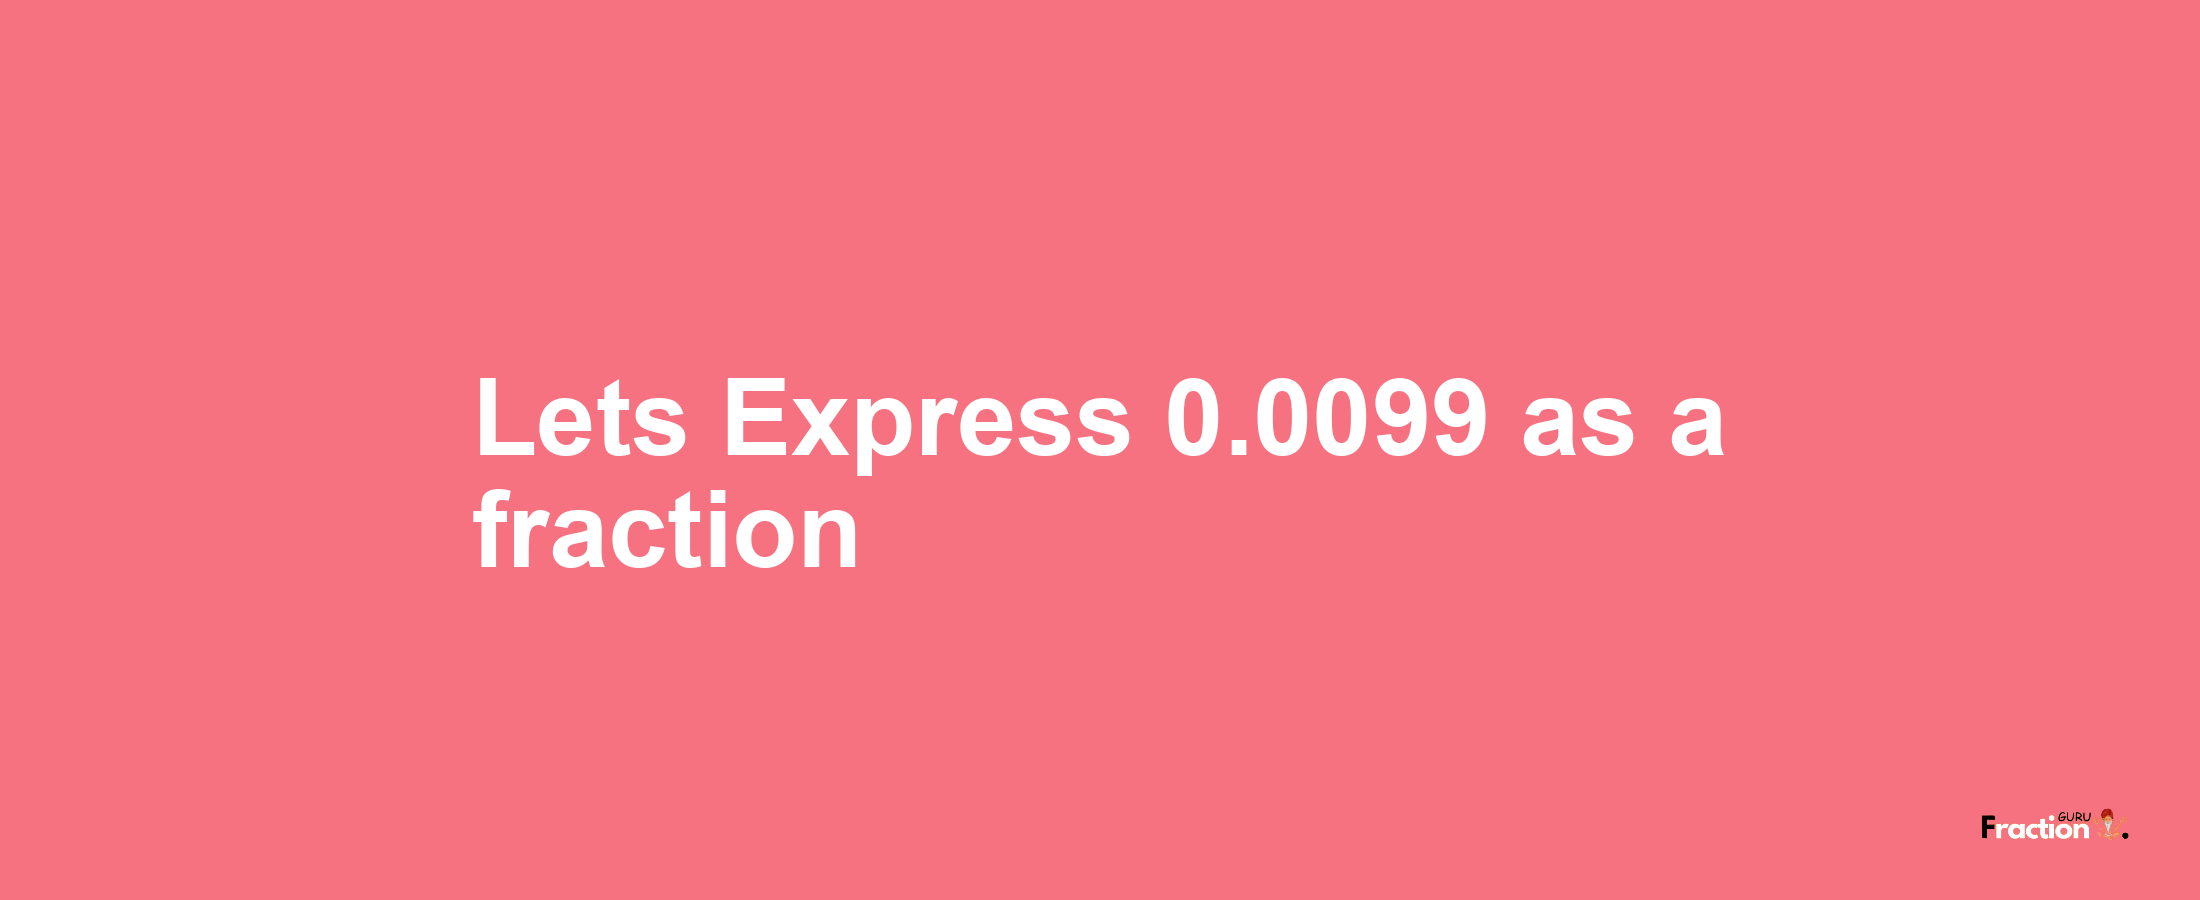 Lets Express 0.0099 as afraction